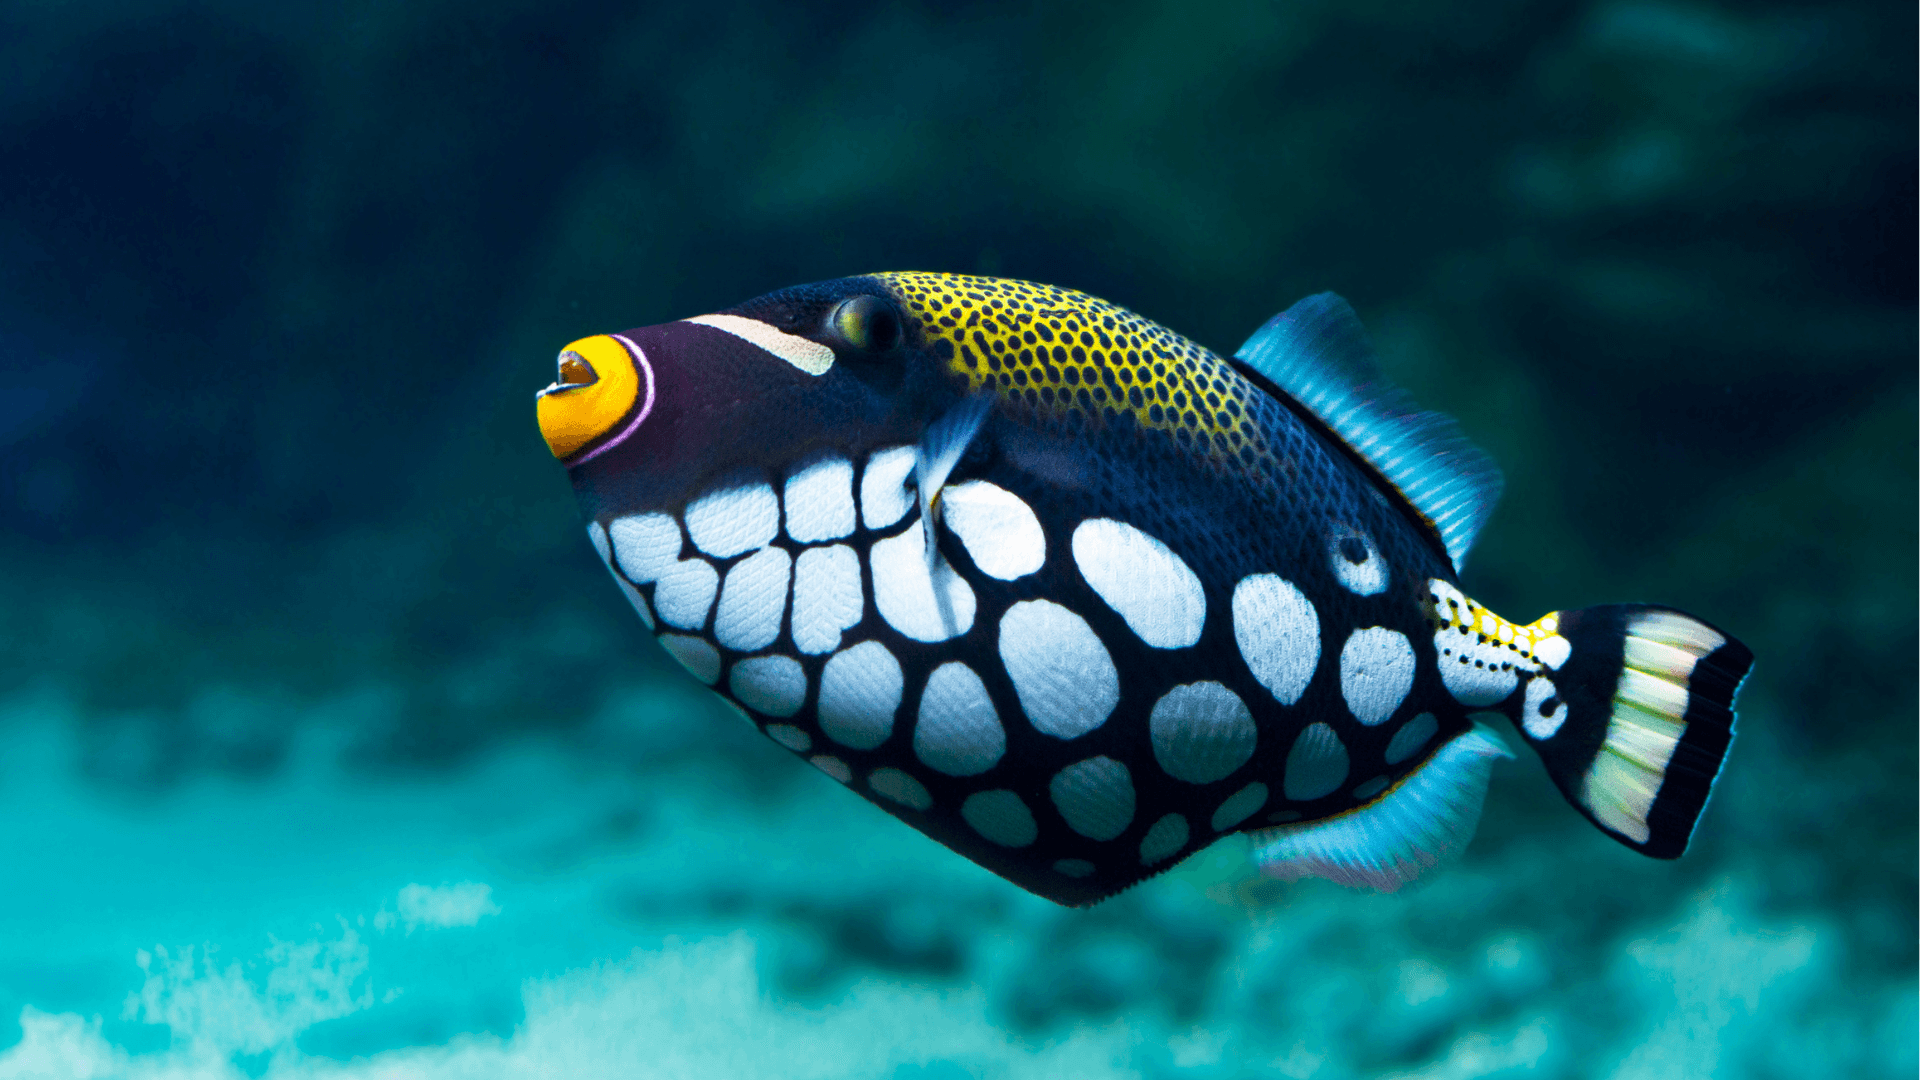 A photo of Triggerfish